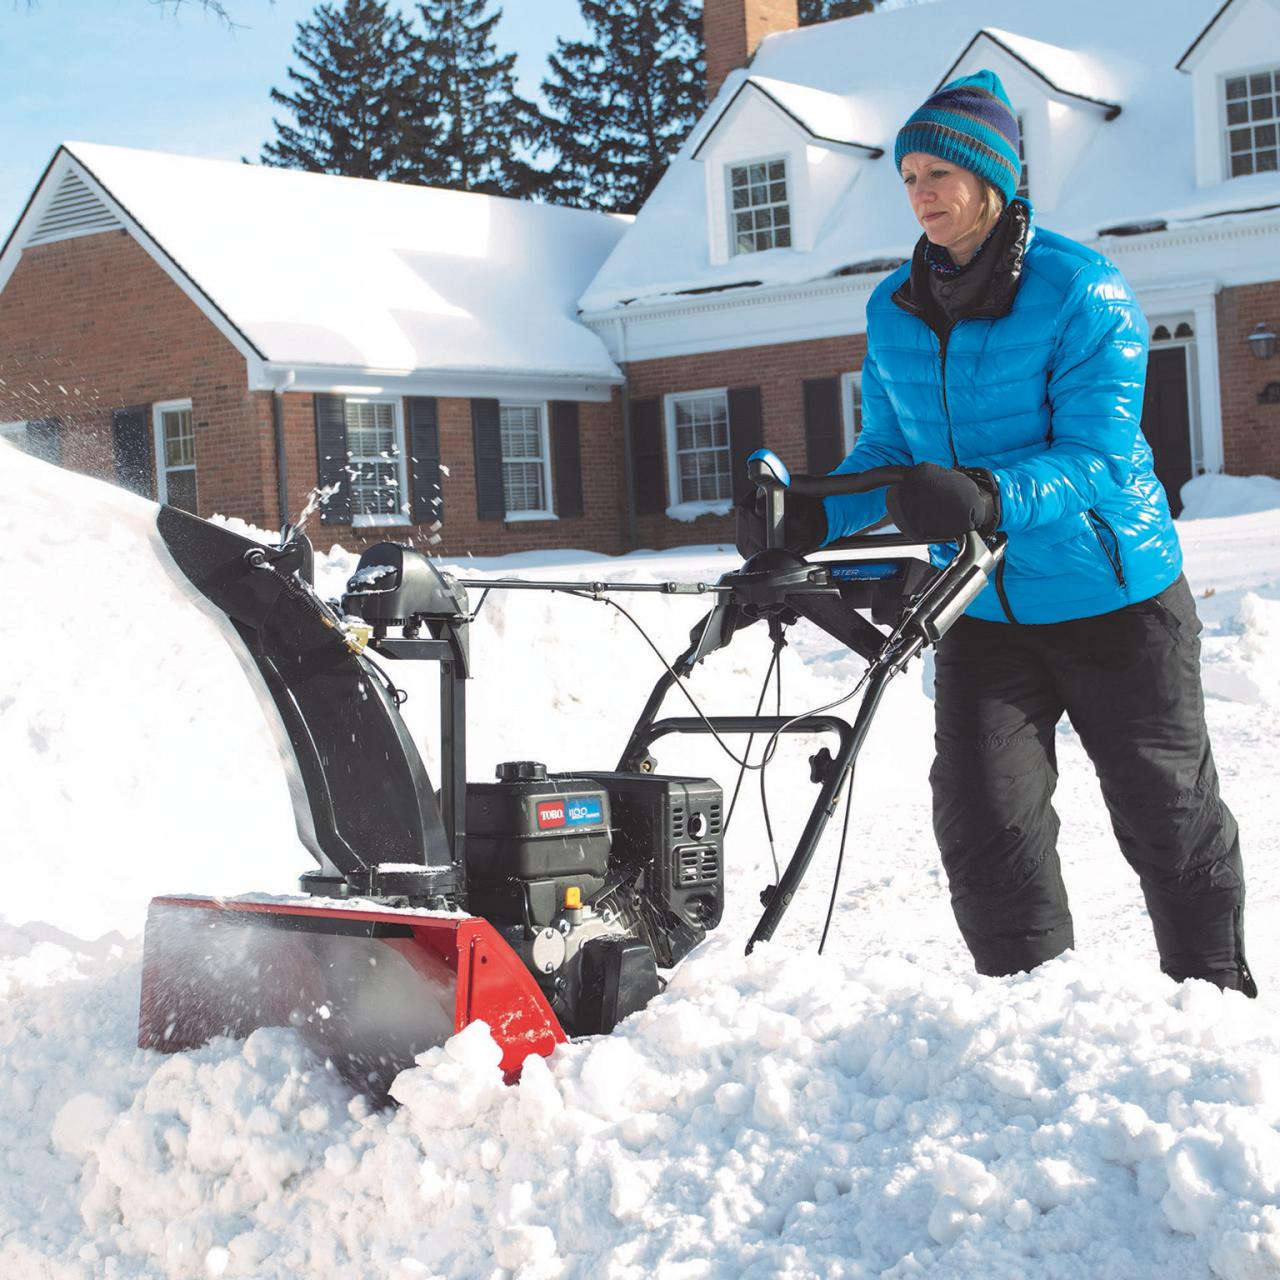 How to Hire the Best Snow Removal Service After Searching 'Snow